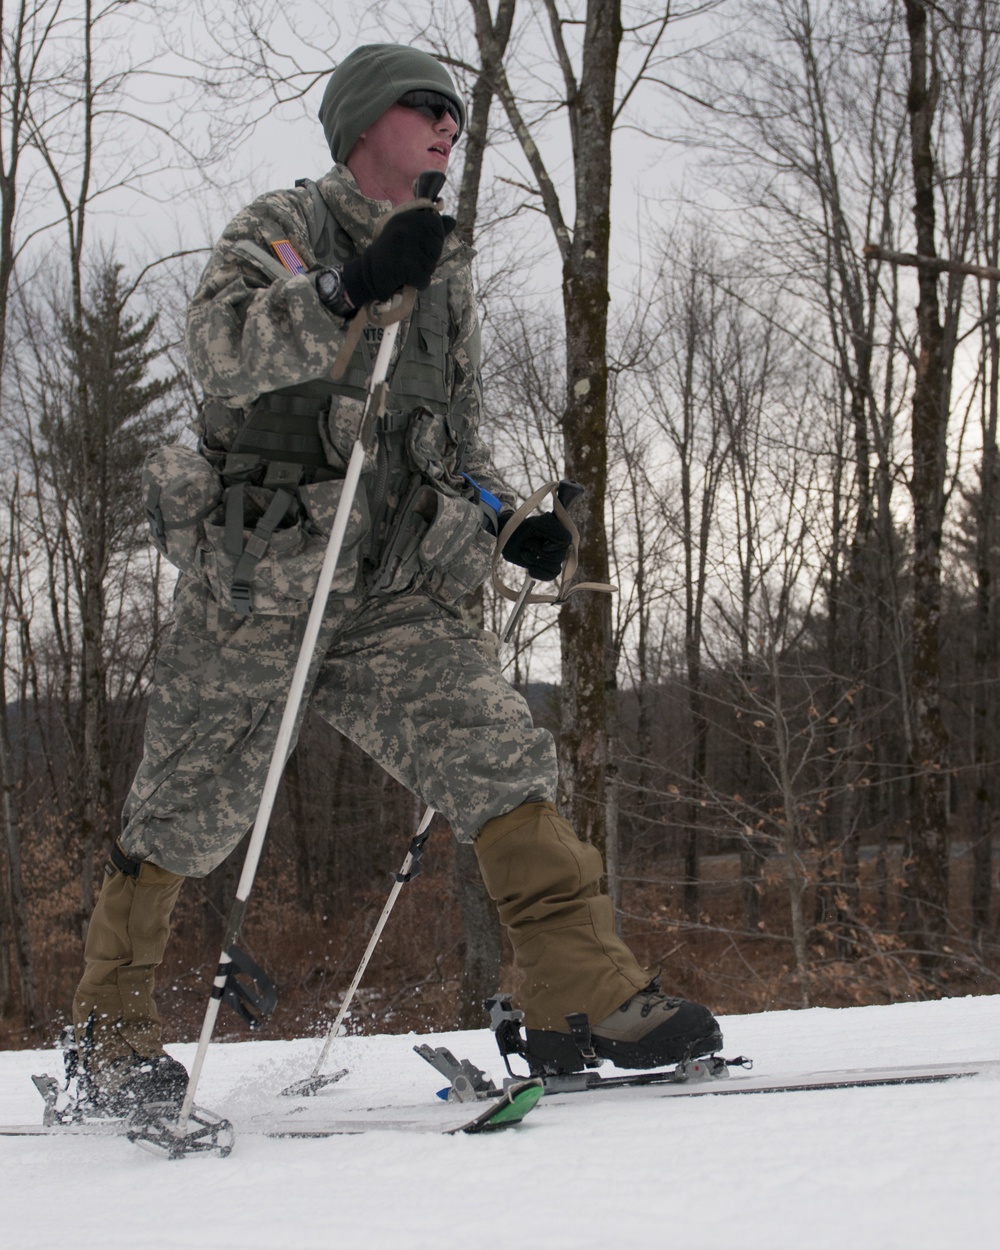 A Soldier pushes forward during biathlon exercise